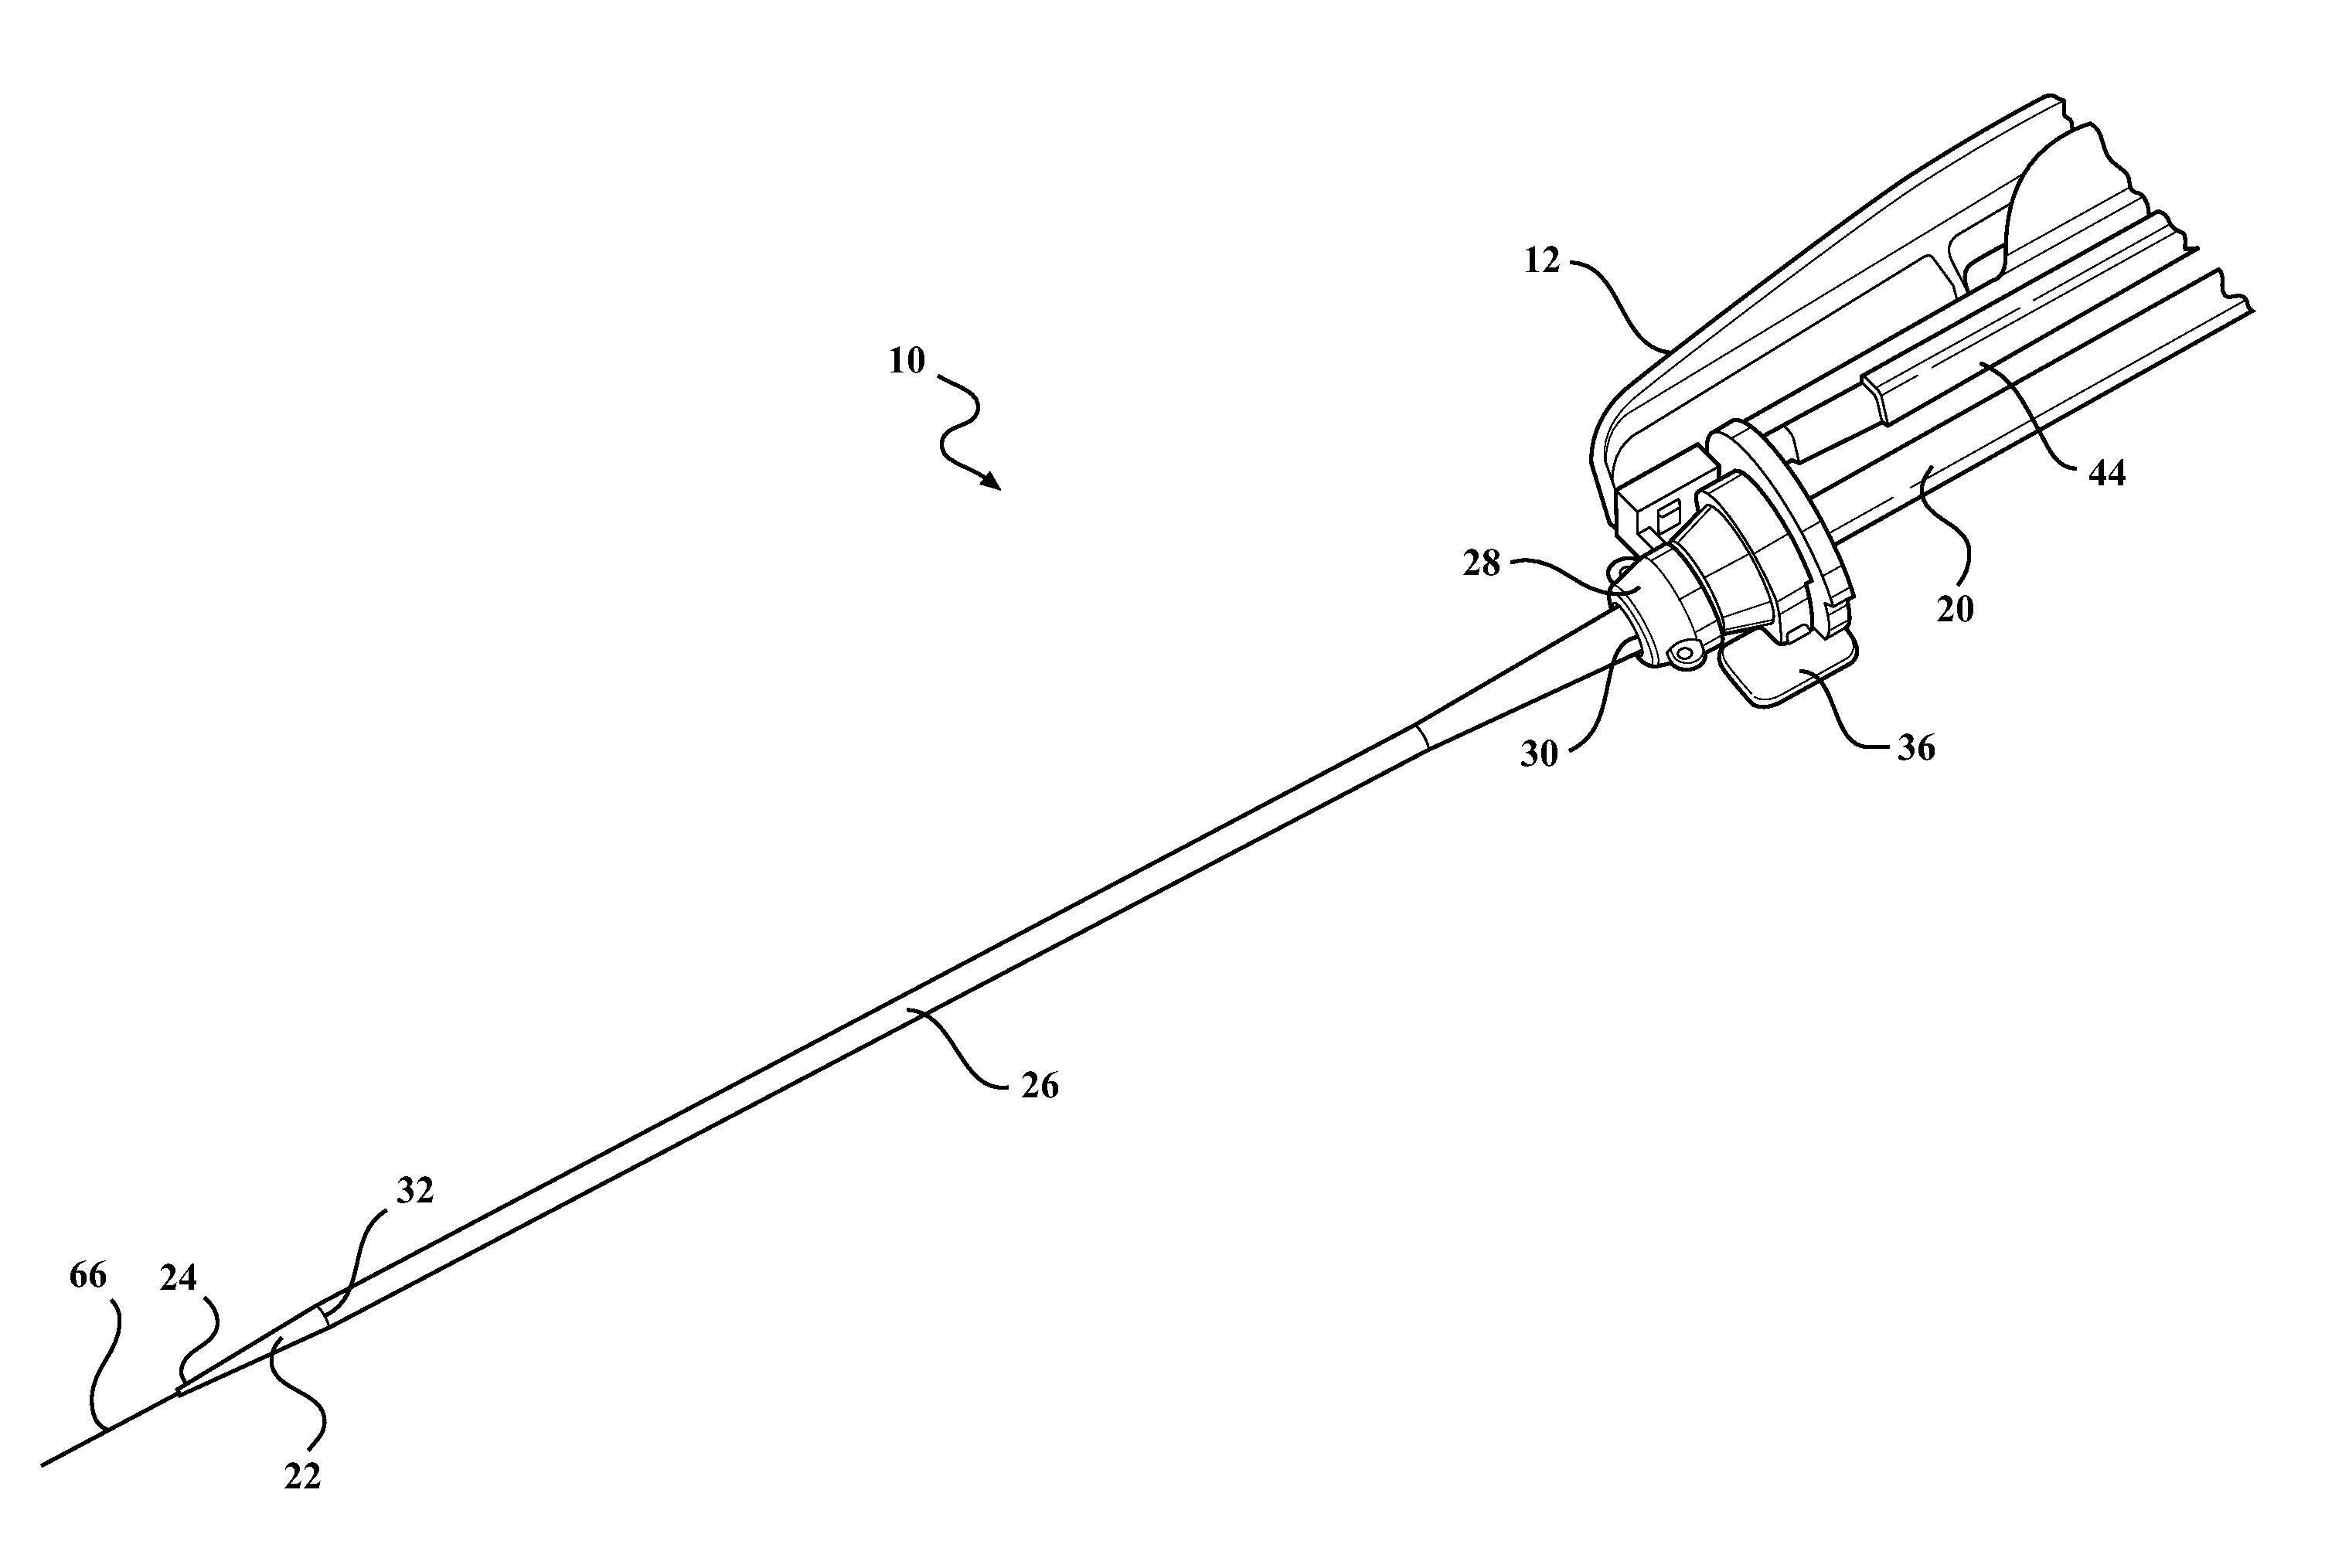 Expandable sheath assembly and method of using same